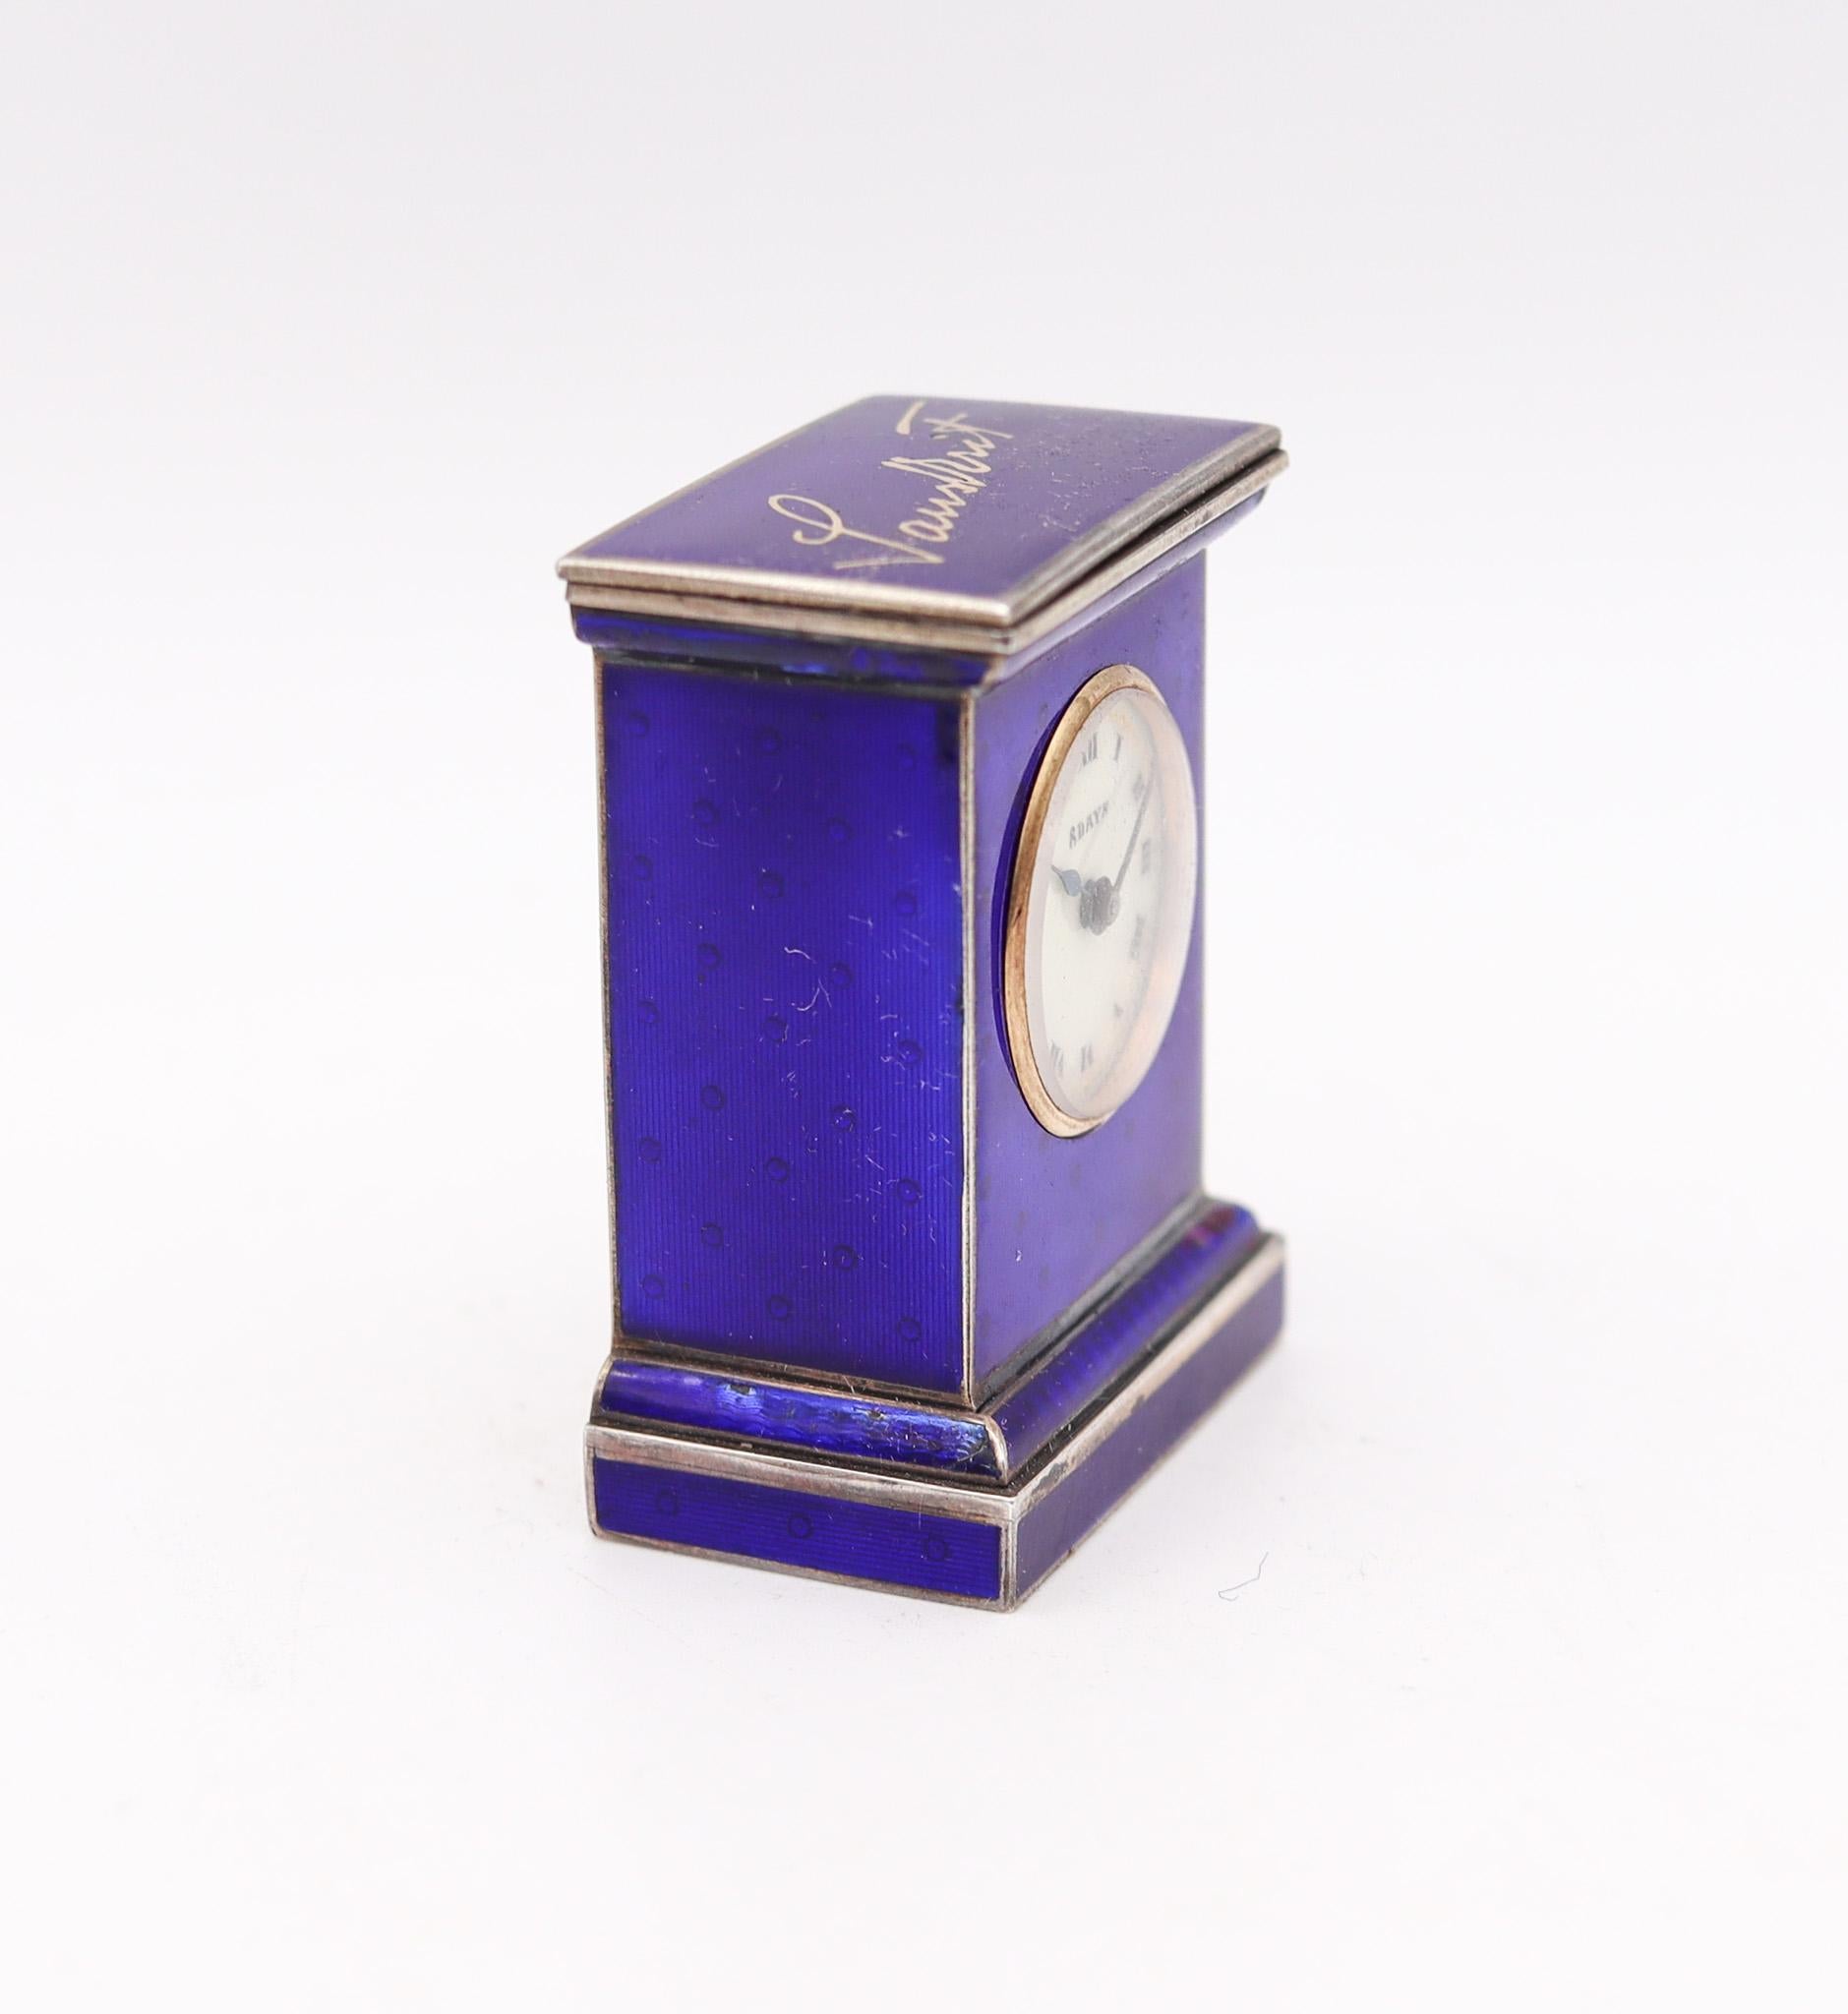 Art Deco Valme 1920 Miniature Travel Clock With Guilloché Enamel In Sterling With Box For Sale